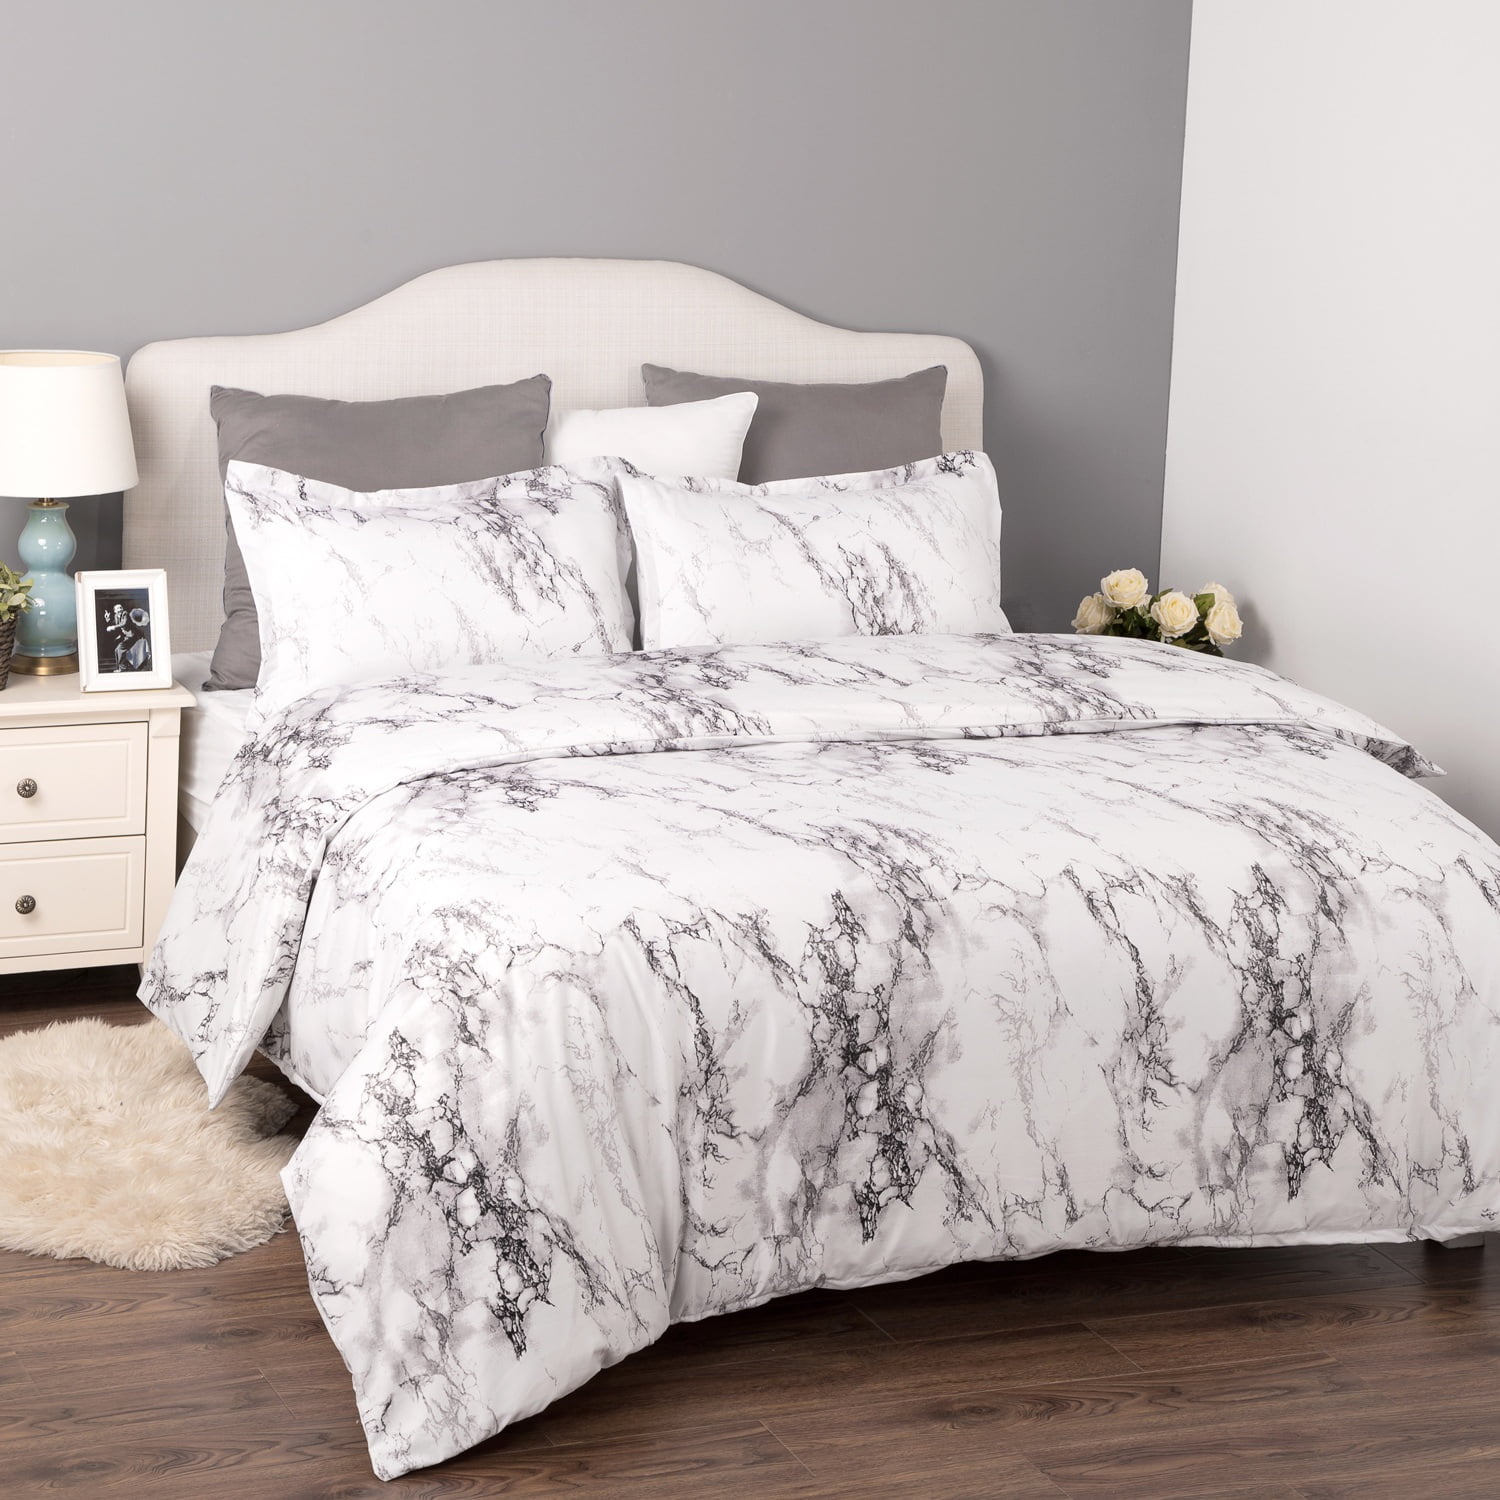 Super S Full/Queen, White - 3-Piece Set Details about   Bedsure Marble Printed Comforter Set 